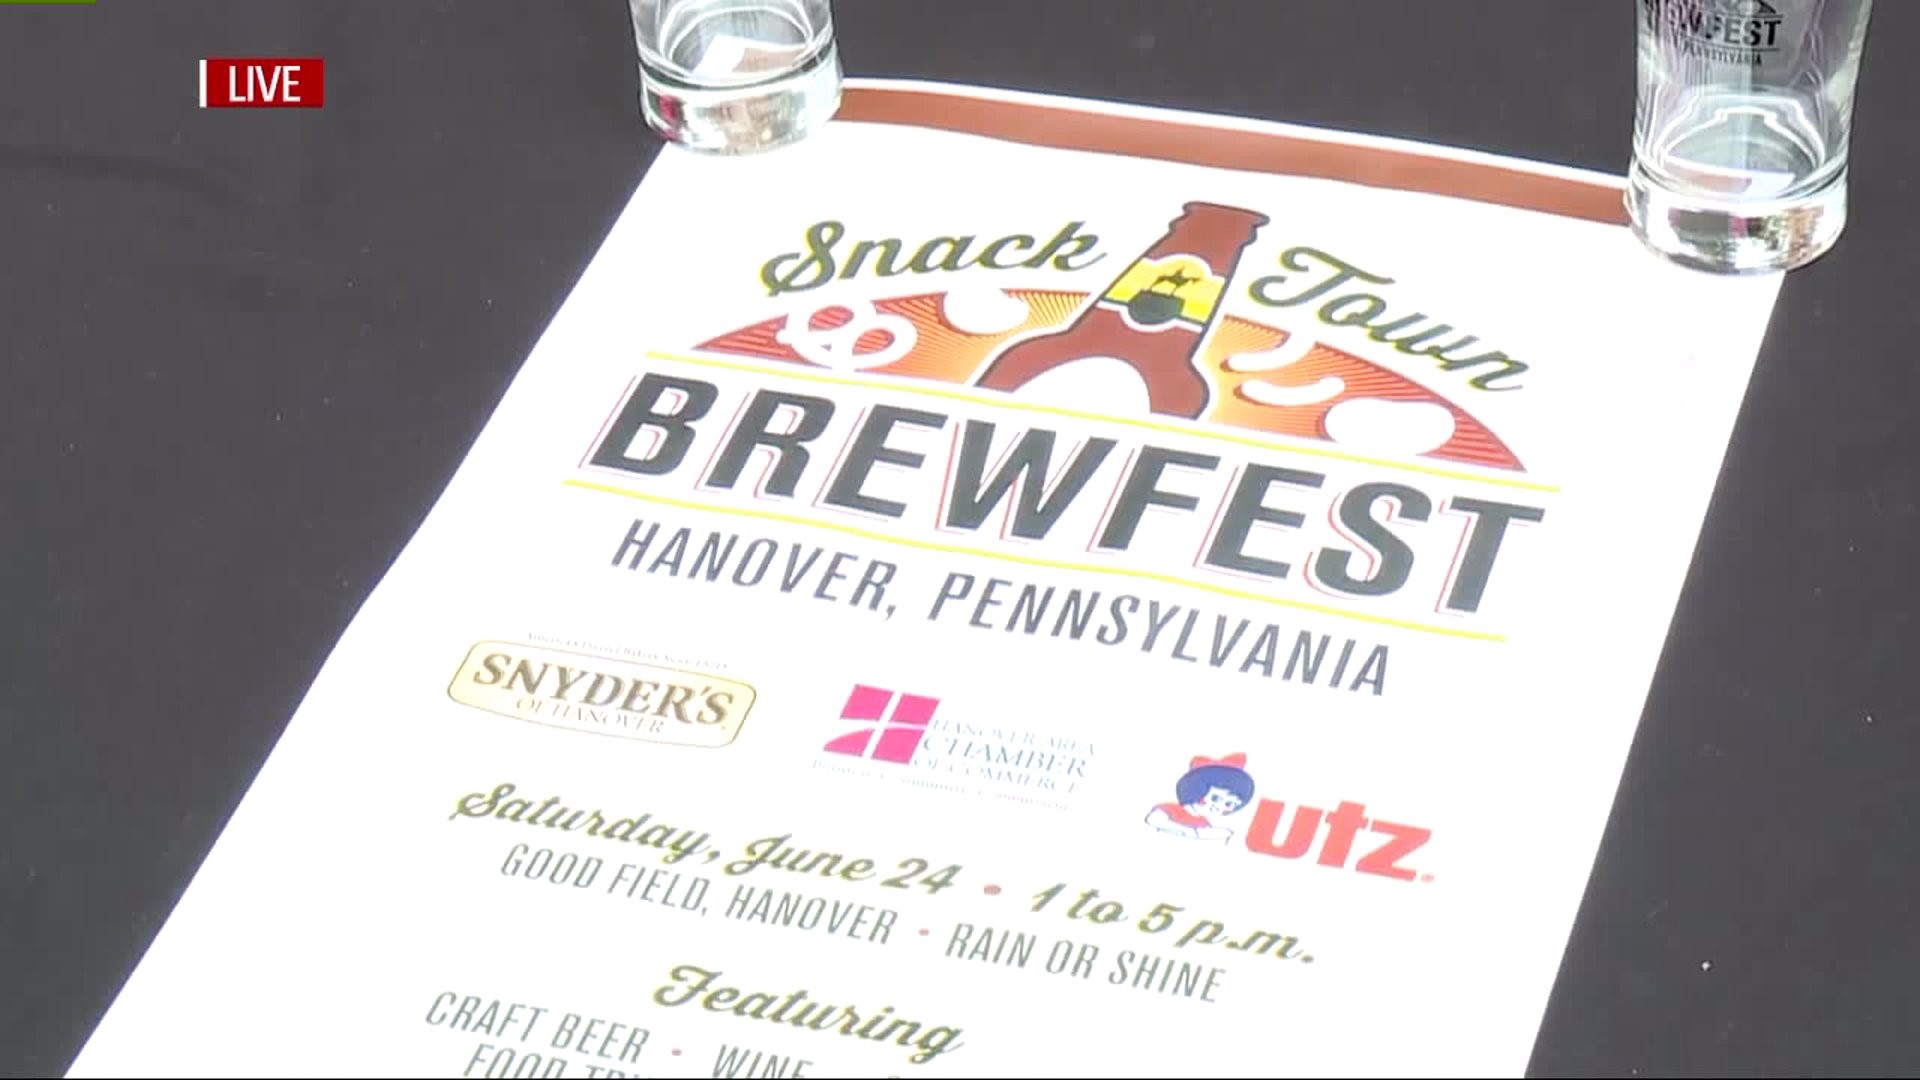 Micreation Brewing Company to participate in the first Snack Town Brewfest in Hanover